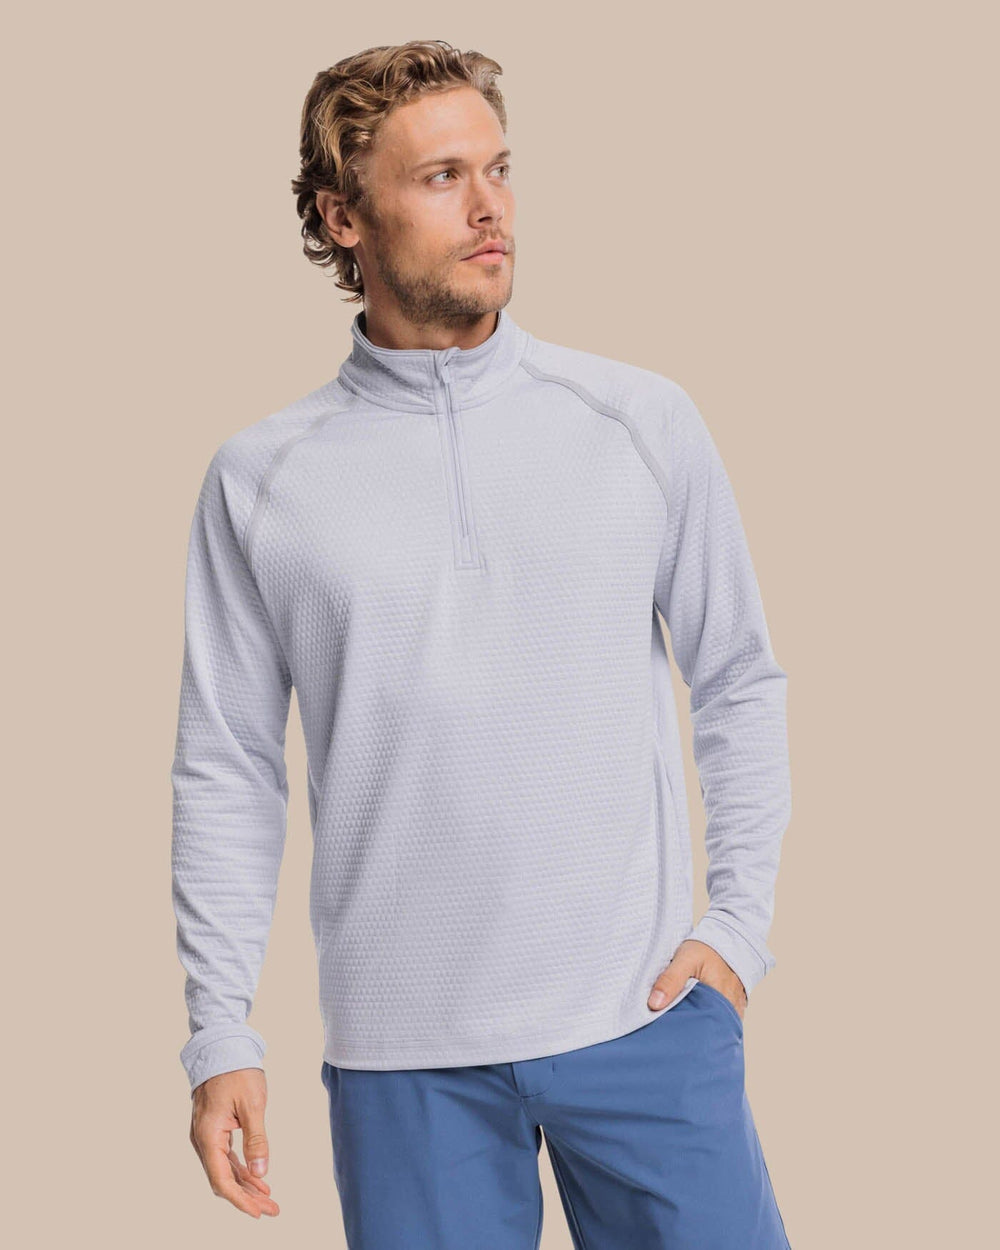 The front view of the Southern Tide Scuttle Heather Quarter Zip Pullover by Southern Tide - Heather Slate Grey